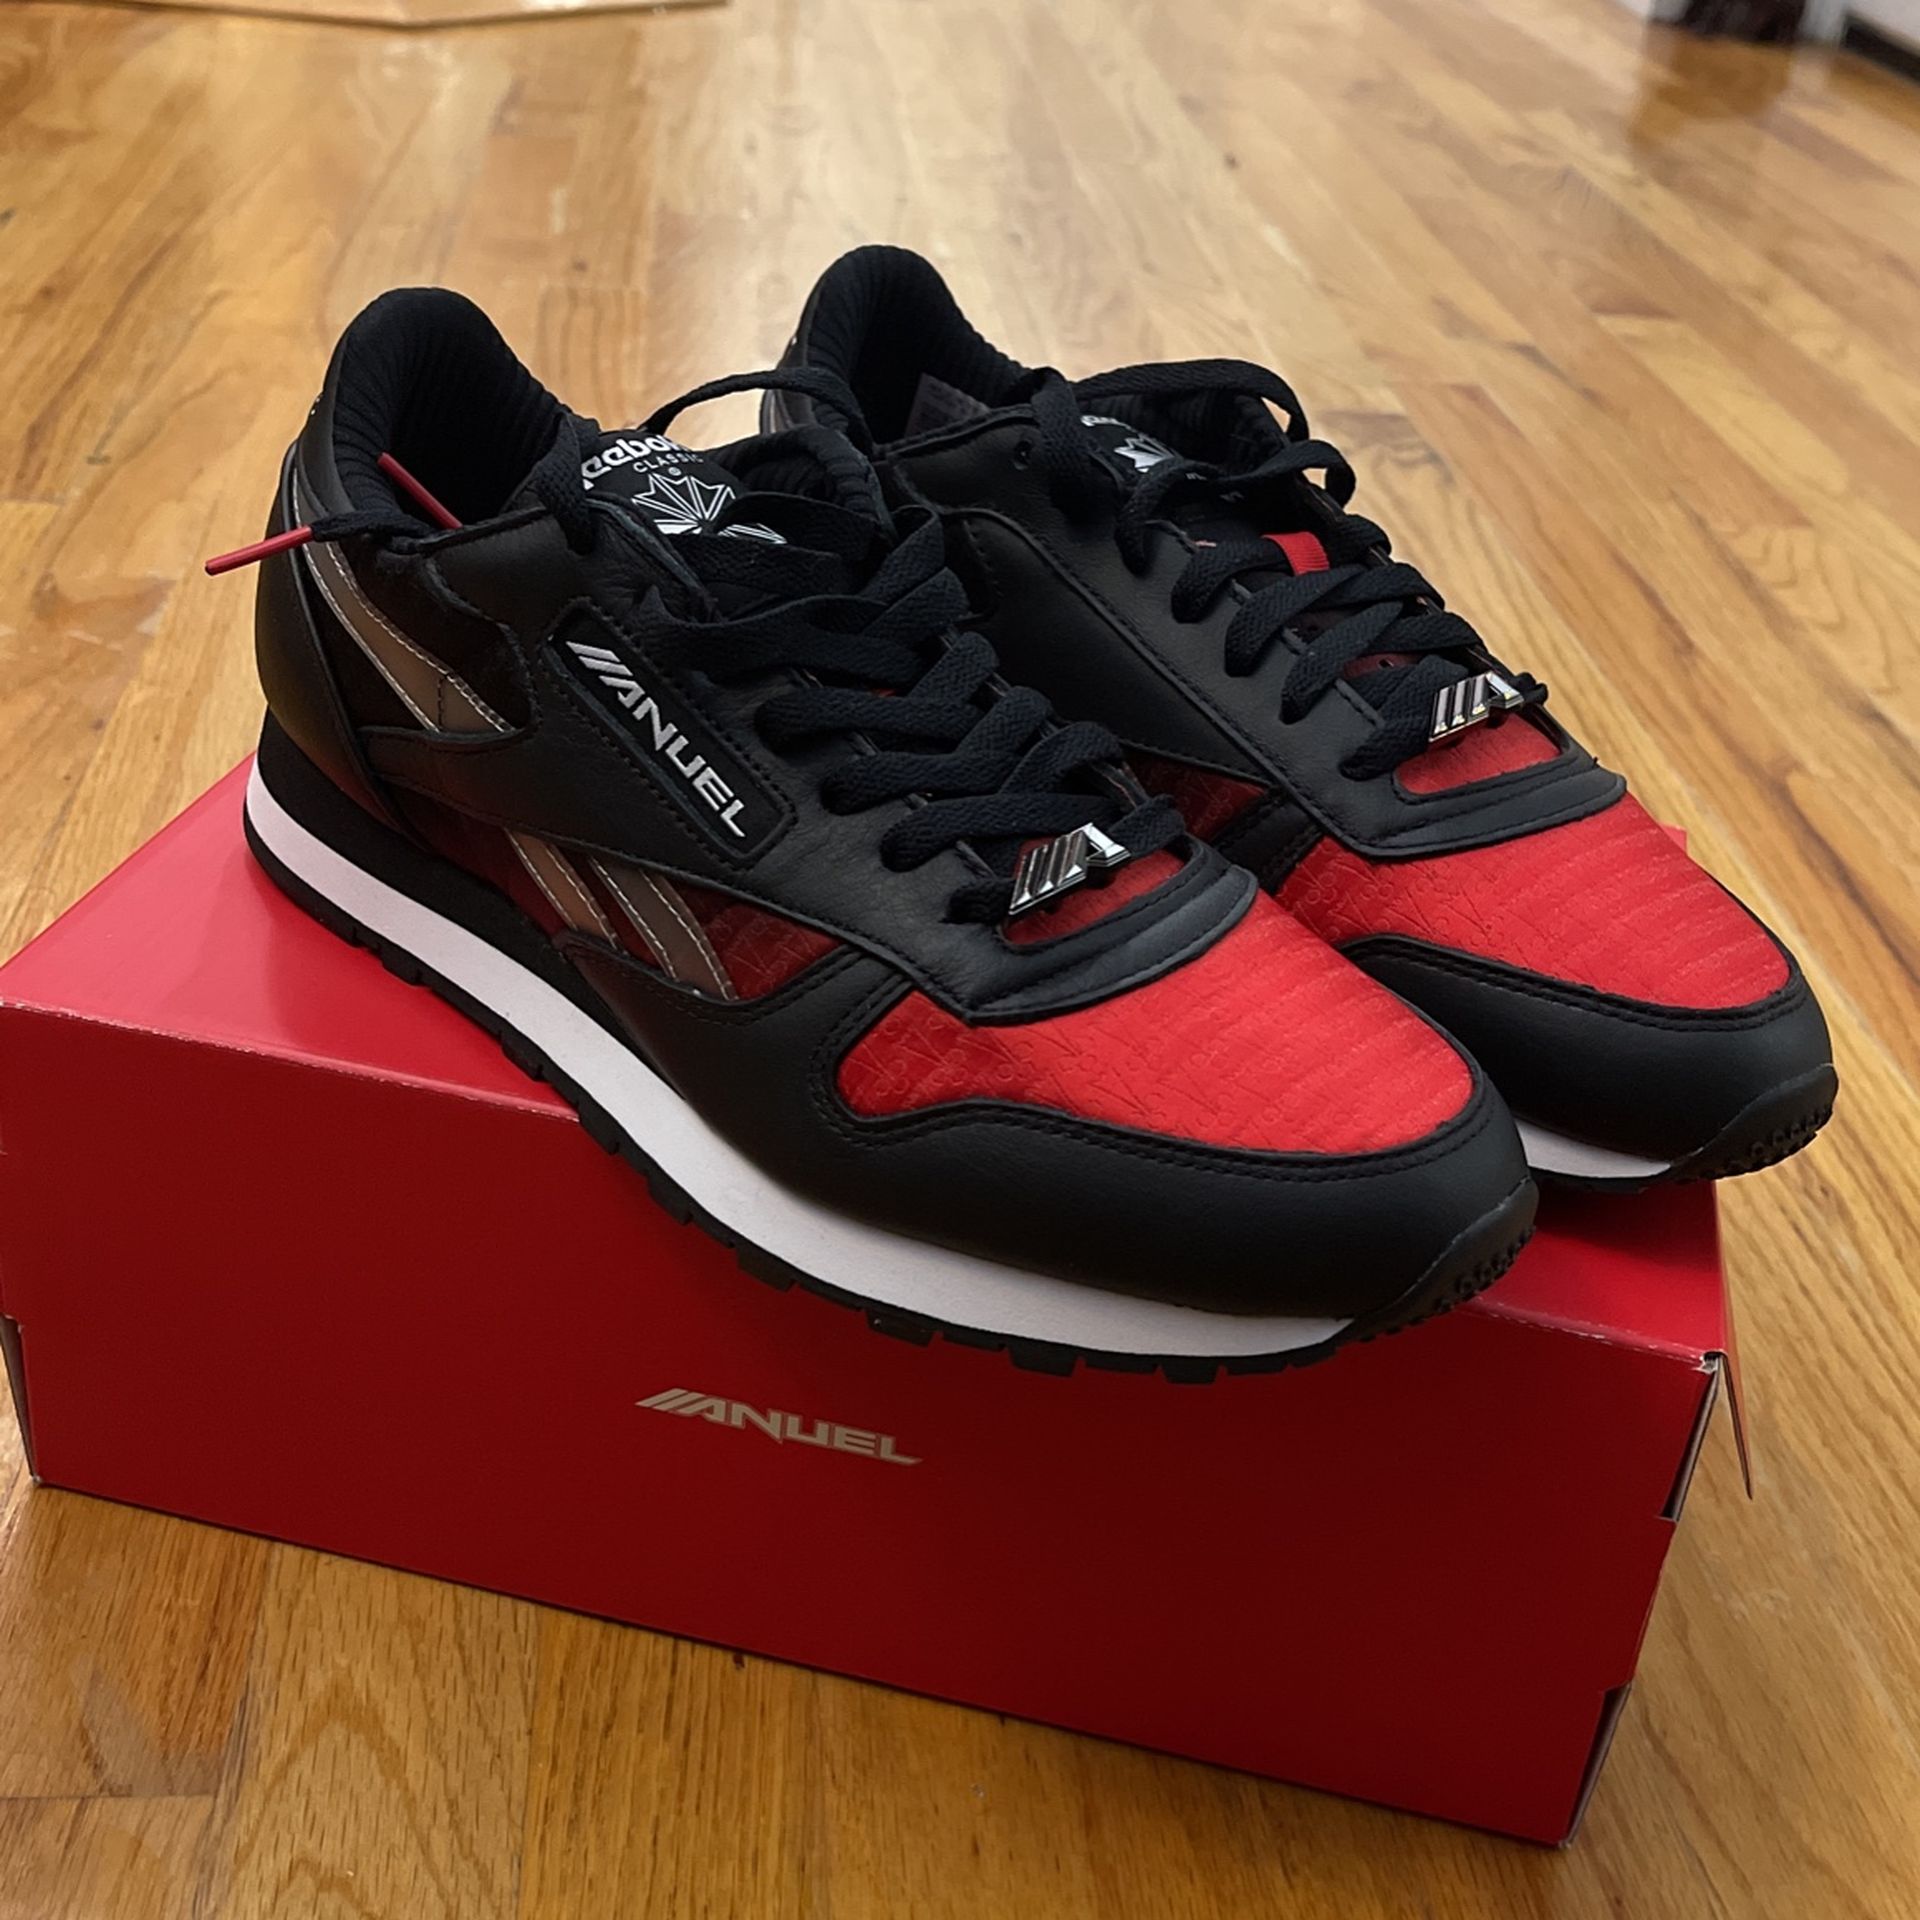 Reebok Classic Sale in Queens, NY - OfferUp